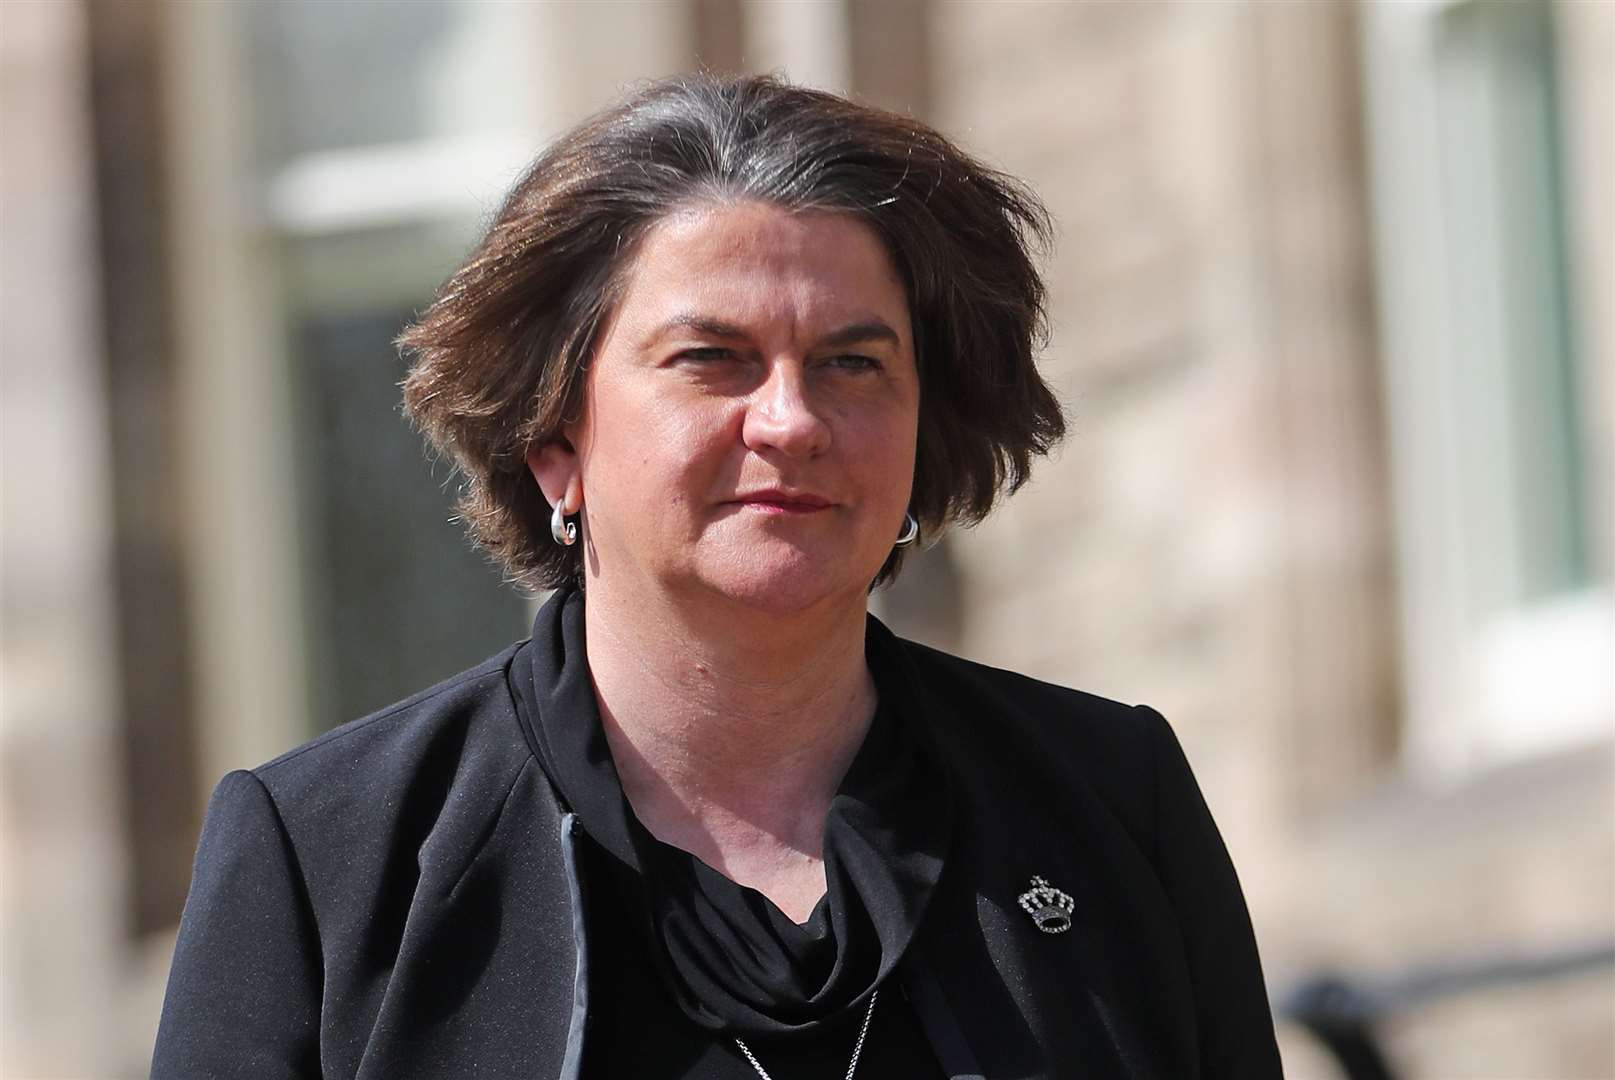 Mrs Foster told the court about the impact the tweet had had on her family (Niall Carson/PA)